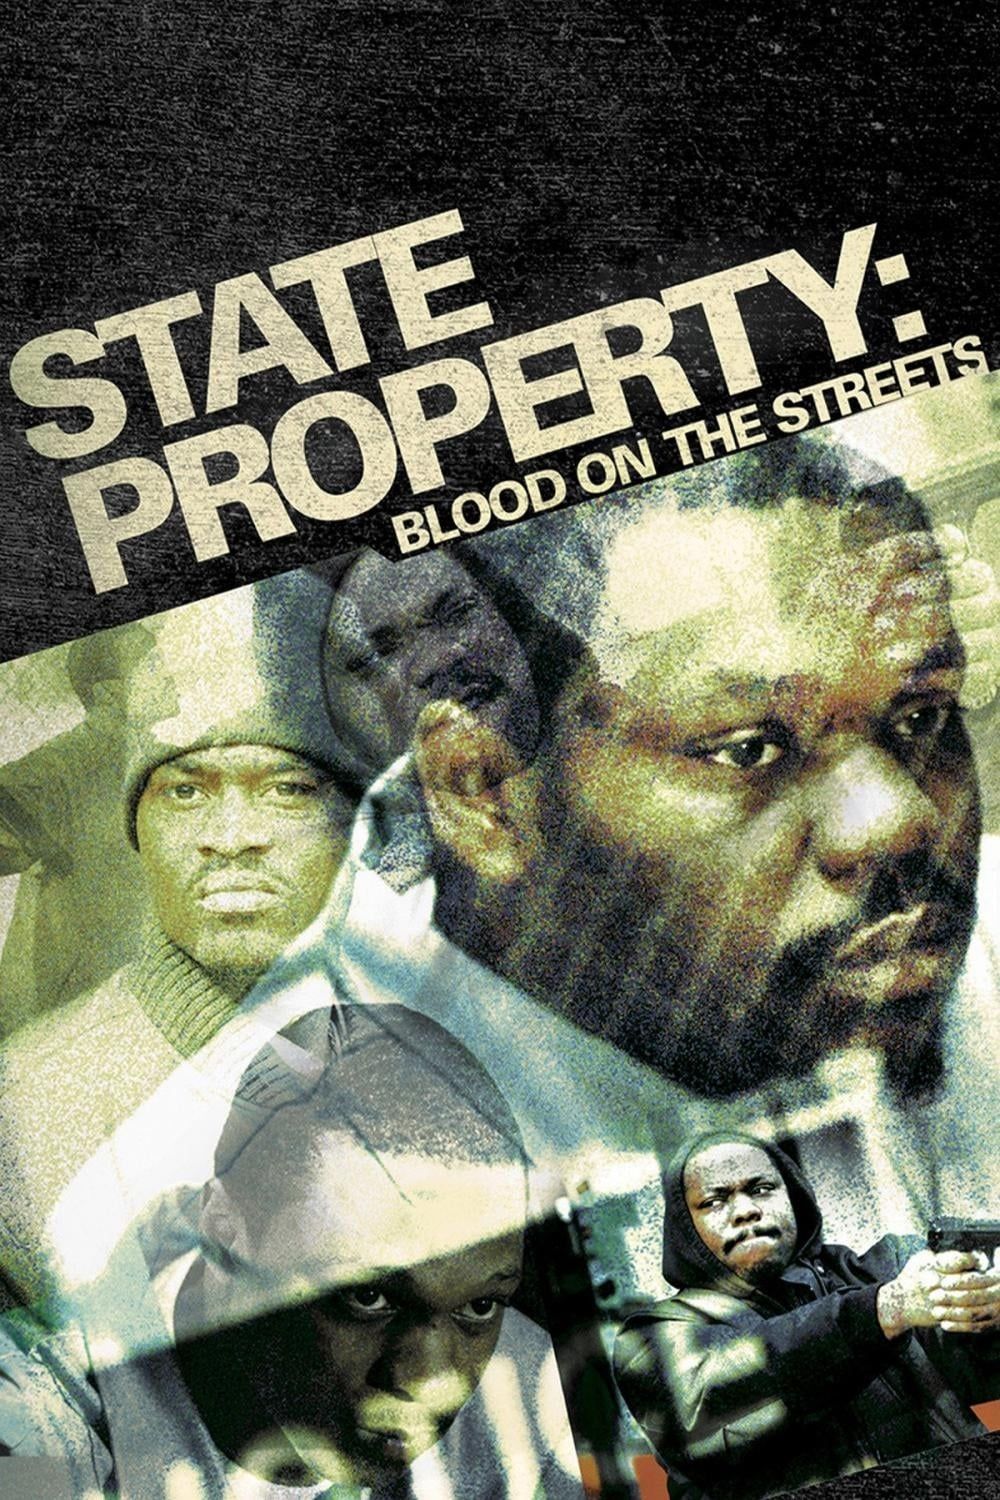 abdulrahman boudi recommends Watch State Property Full Length Movie